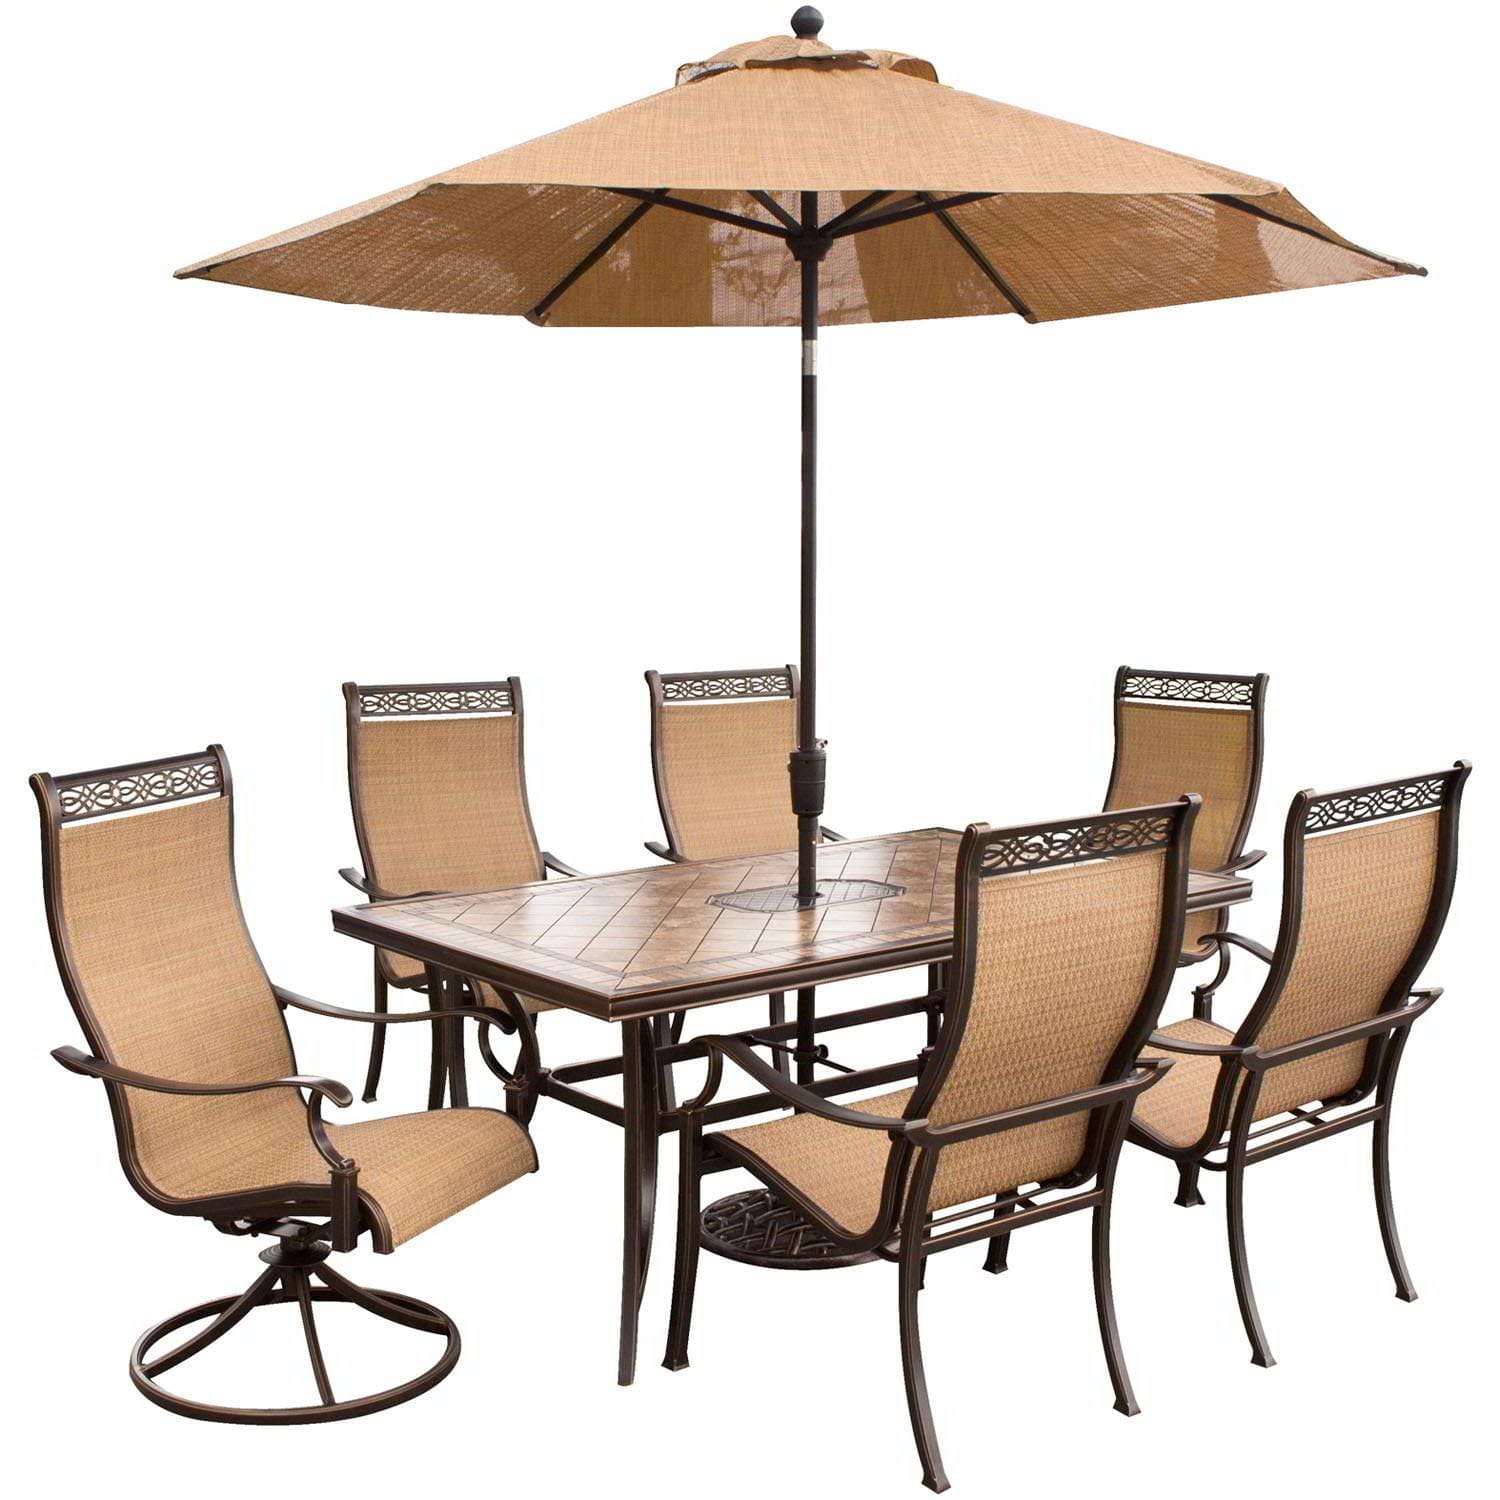 Hanover Outdoor Dining Set Hanover - Monaco 7 Pc. Dining Set with Umbrella- Two Swivel Chairs, Four Dining Chairs, and a 40 x 68 in. Table with Umbrella